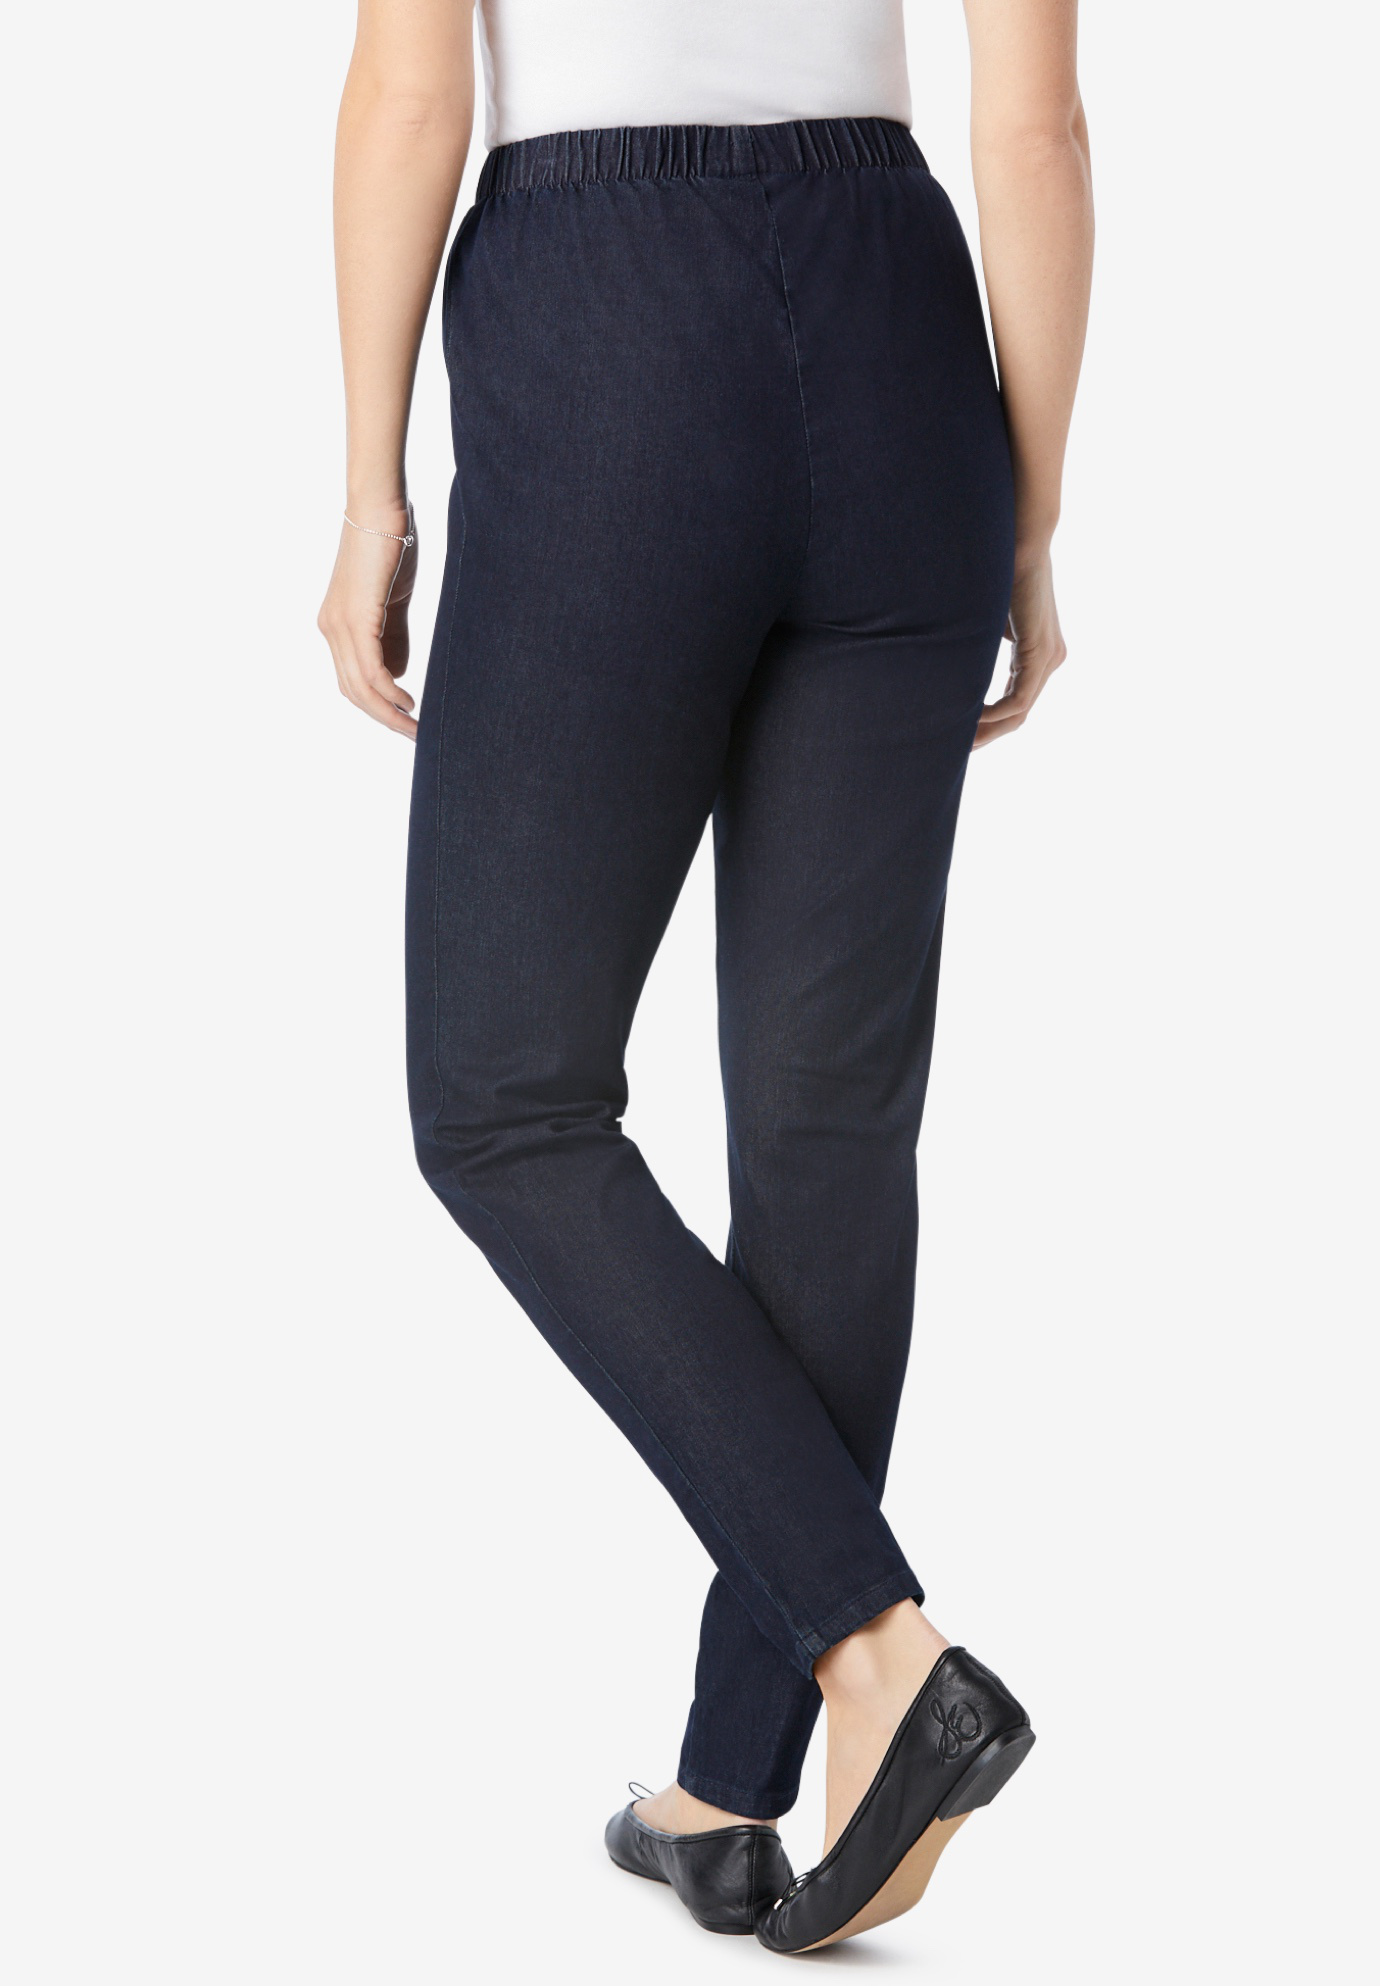 Woman Within Women's Plus Size Tall Fineline Denim Jegging Jegging - image 3 of 5